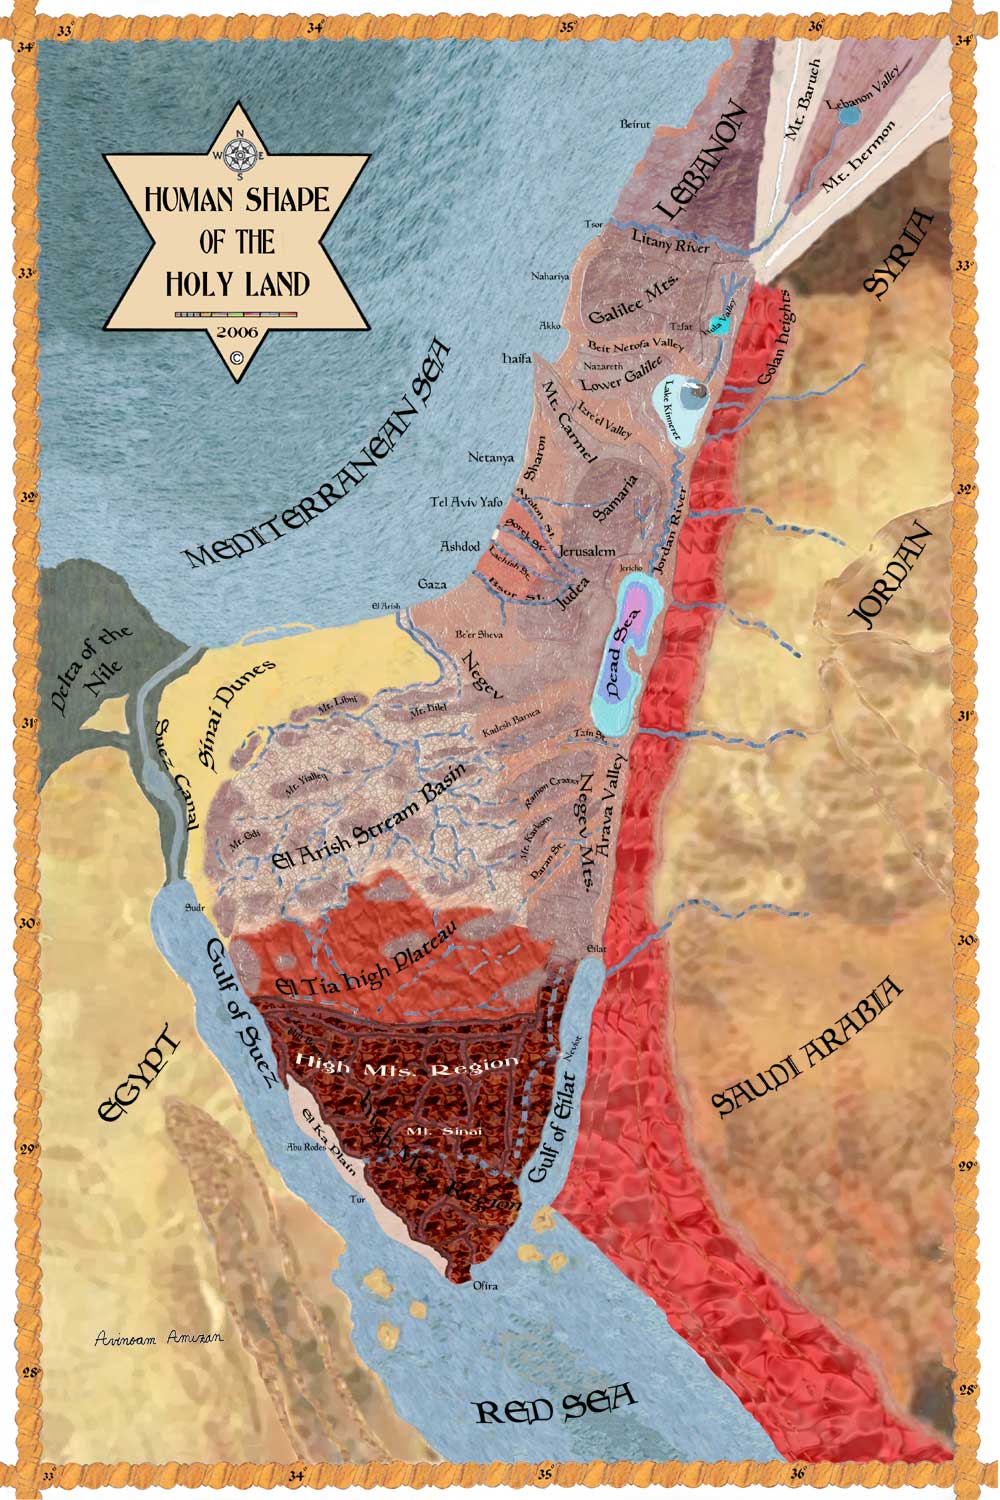 The Human Shape of the Holy Land